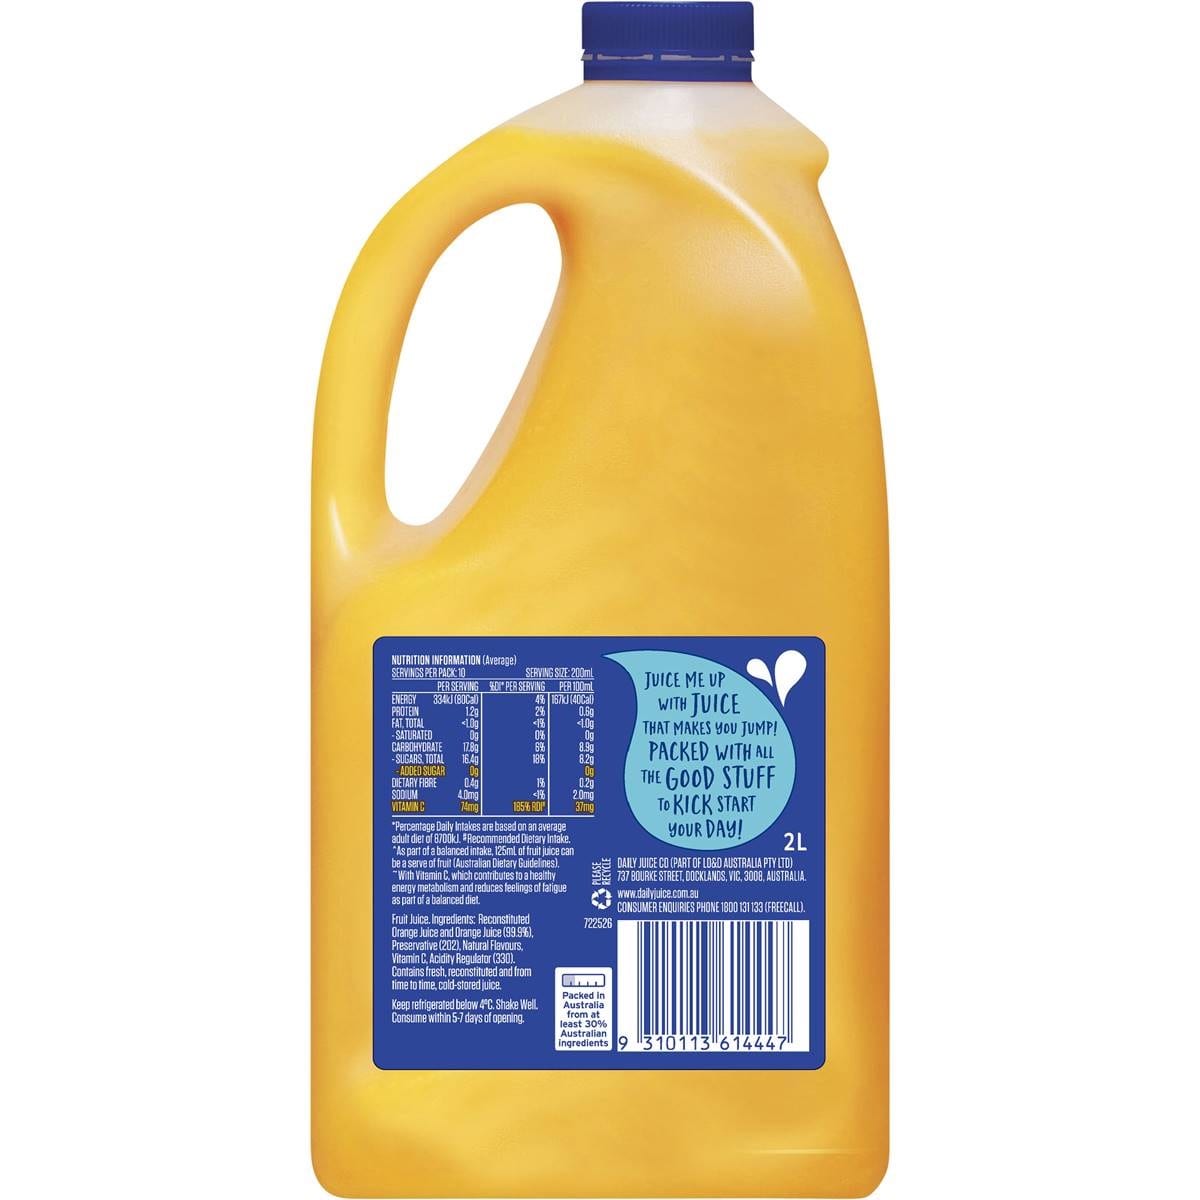 [Fresh]-Daily-Juice-Family-Share-Pack---Orange-Juice,-No-Pulp,-No-Added-Sugar,-2L-1